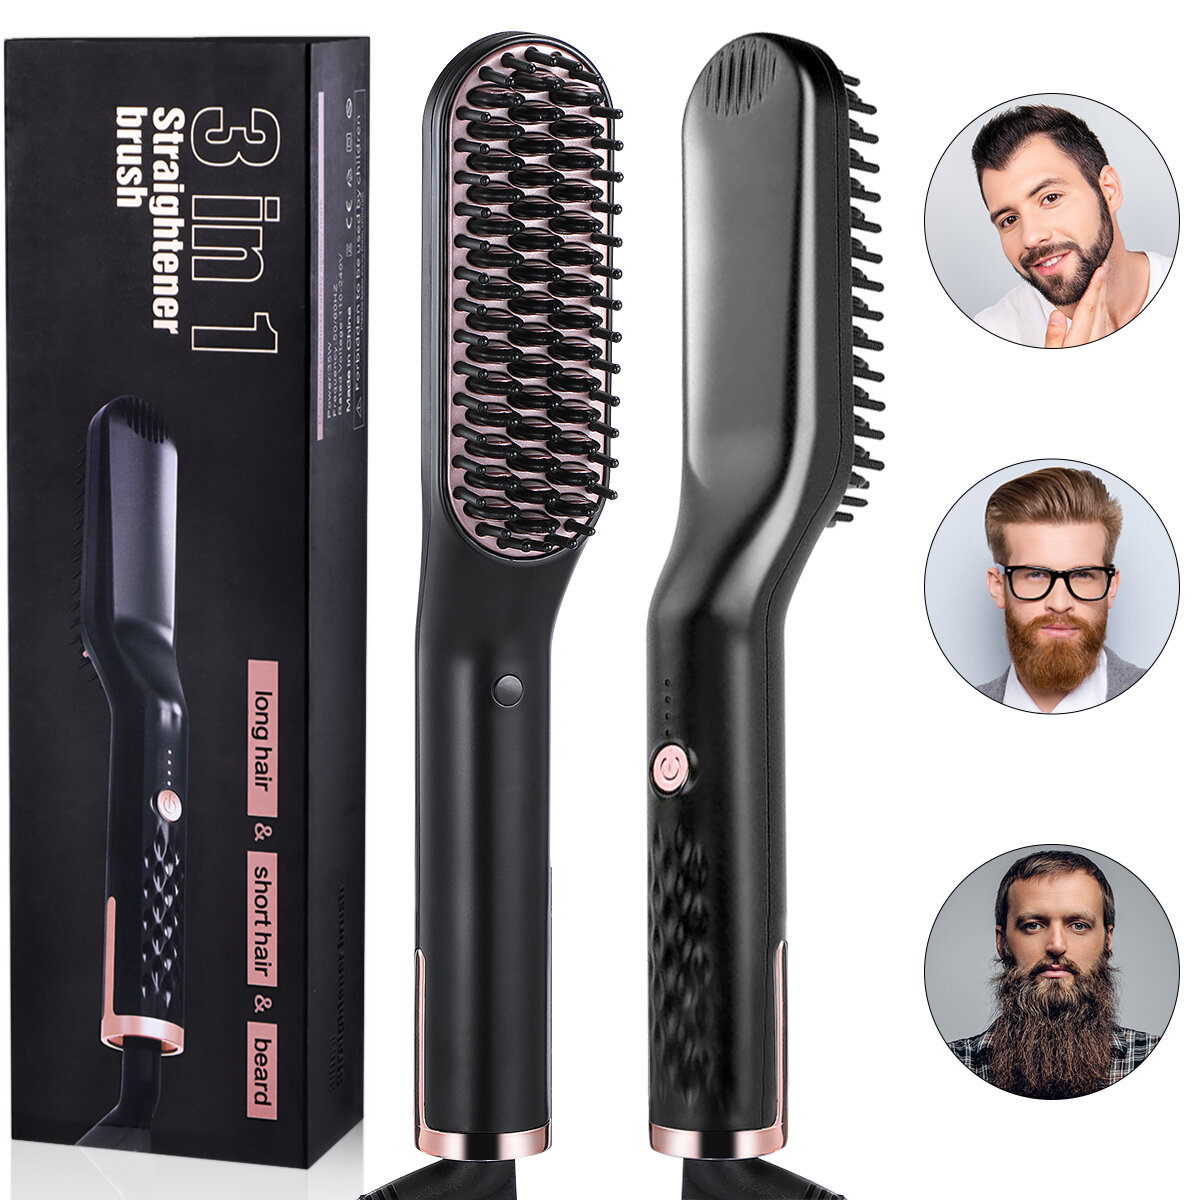 

3 in 1 Men & Women Beard Straightening Comb Electric Ceramic Ionic Fast Heating Brush Portable Travel Hair Styling Comb